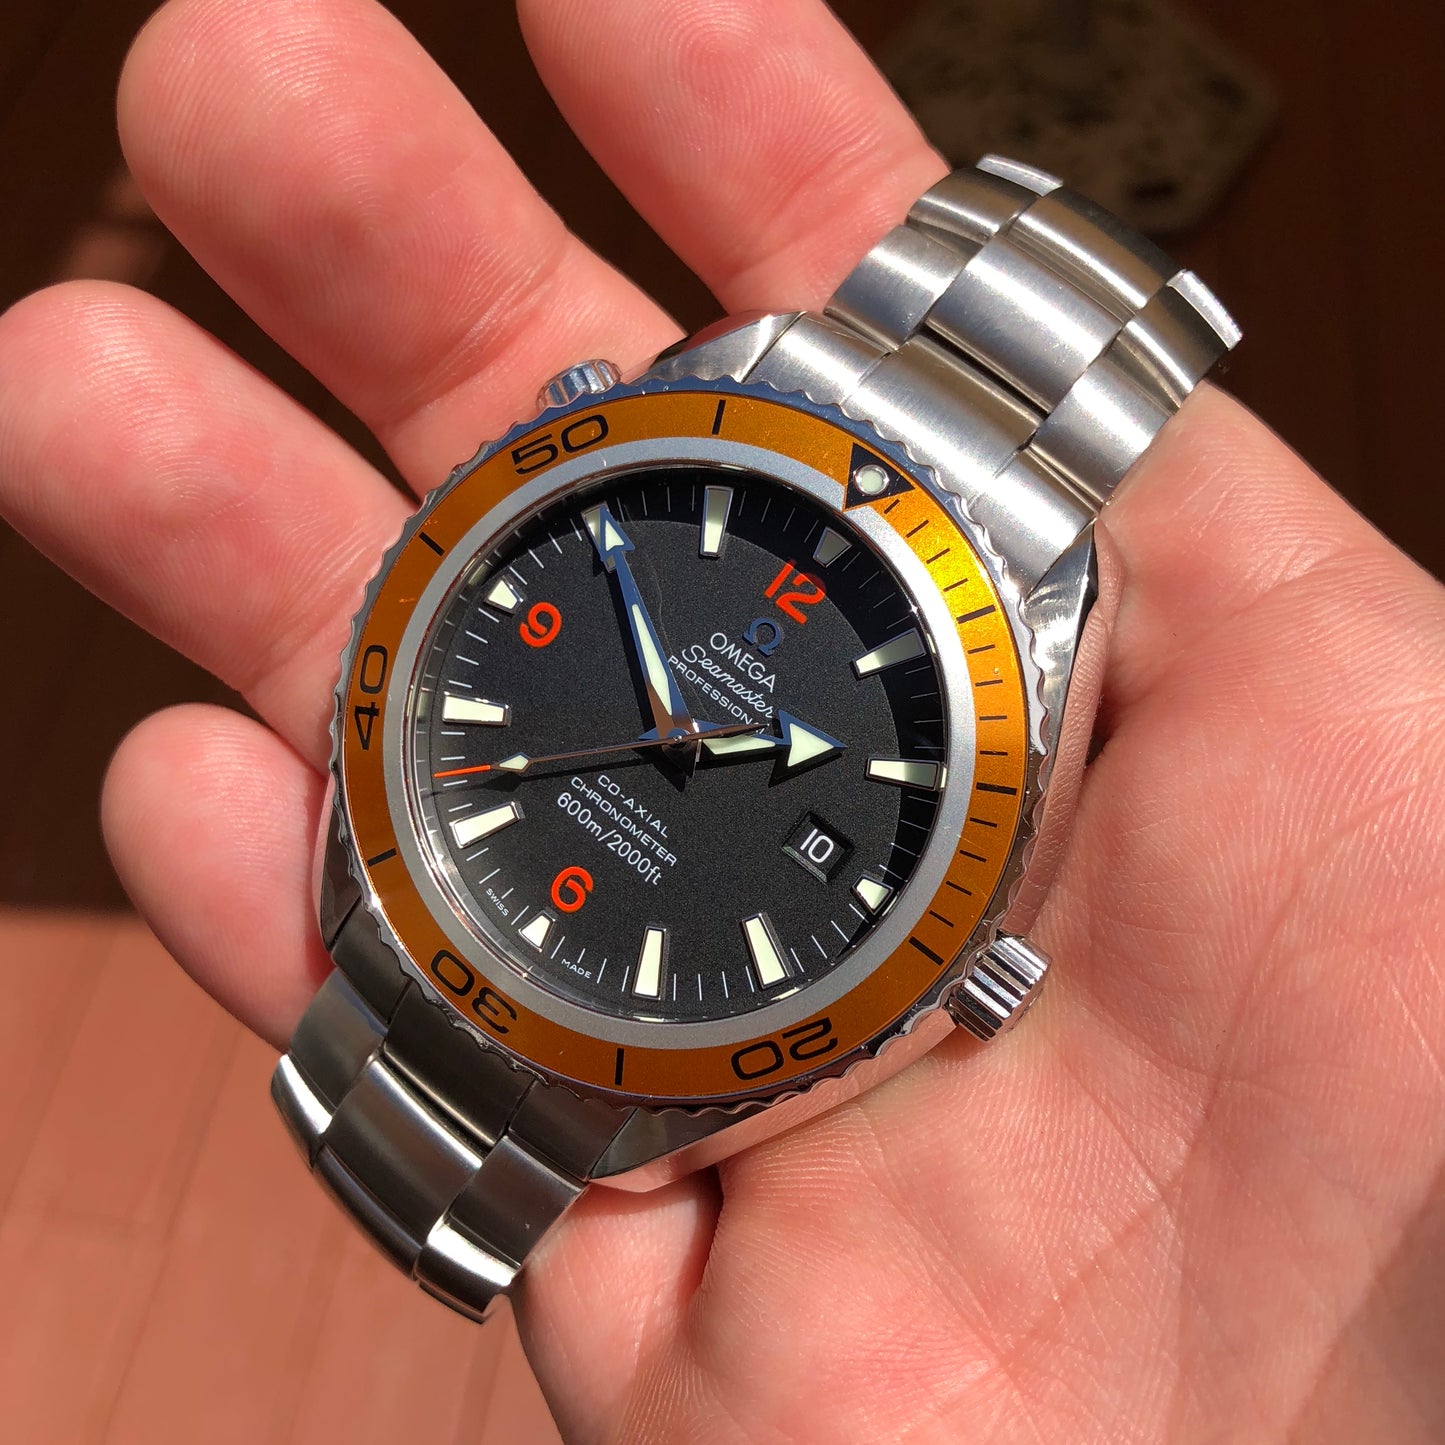 Omega Seamaster 2208.50 Orange Bezel 45.5mm Co-Axial Steel Wristwatch Box & Papers - Hashtag Watch Company